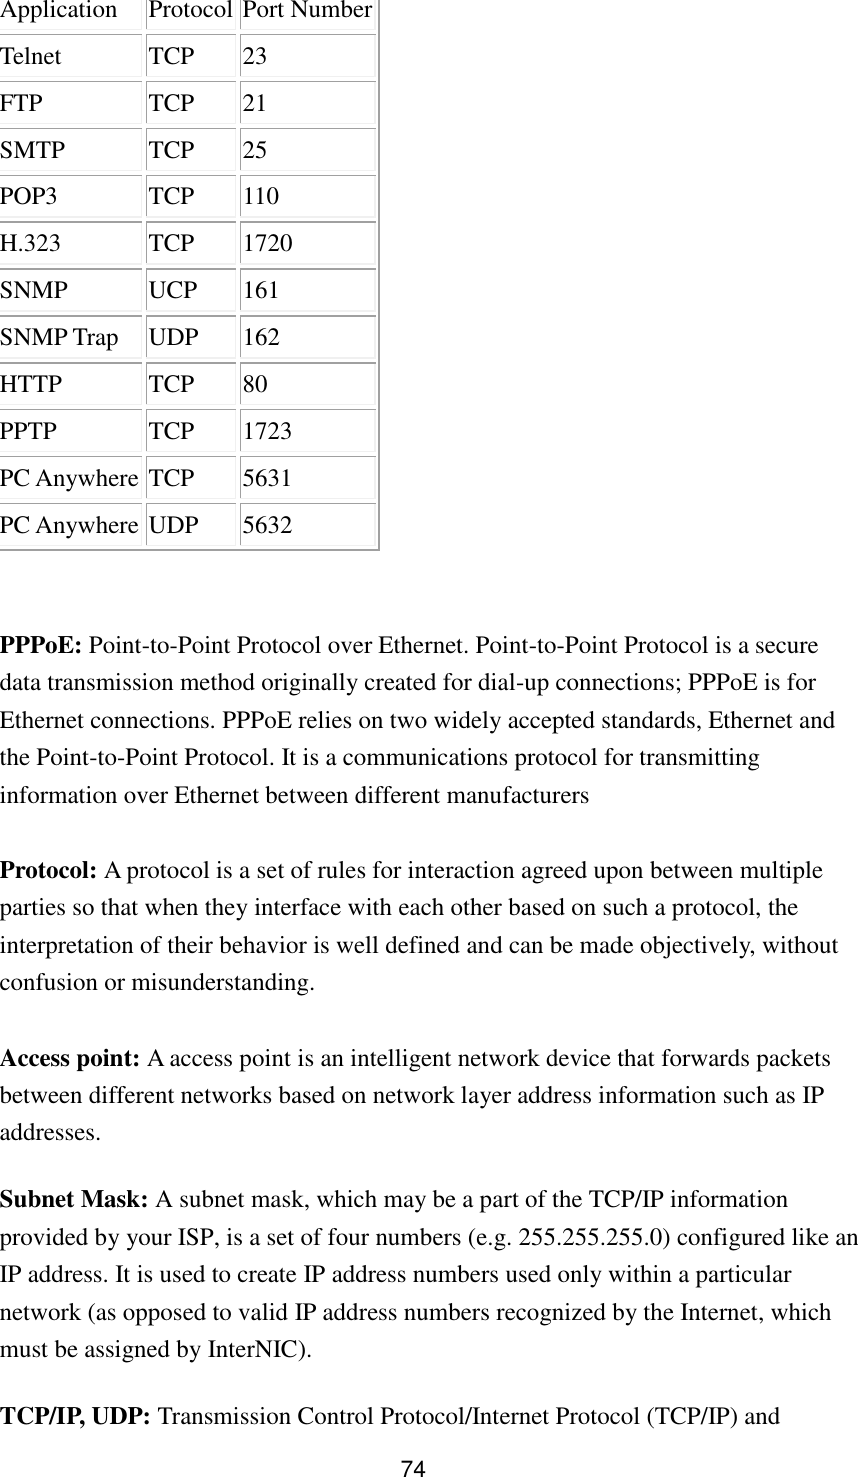 74 Application Protocol Port Number Telnet TCP 23 FTP TCP 21 SMTP TCP 25 POP3 TCP 110 H.323 TCP 1720 SNMP UCP 161 SNMP Trap UDP 162 HTTP TCP 80 PPTP TCP 1723 PC Anywhere TCP 5631 PC Anywhere UDP 5632   PPPoE: Point-to-Point Protocol over Ethernet. Point-to-Point Protocol is a secure data transmission method originally created for dial-up connections; PPPoE is for Ethernet connections. PPPoE relies on two widely accepted standards, Ethernet and the Point-to-Point Protocol. It is a communications protocol for transmitting information over Ethernet between different manufacturers  Protocol: A protocol is a set of rules for interaction agreed upon between multiple parties so that when they interface with each other based on such a protocol, the interpretation of their behavior is well defined and can be made objectively, without confusion or misunderstanding.    Access point: A access point is an intelligent network device that forwards packets between different networks based on network layer address information such as IP addresses. Subnet Mask: A subnet mask, which may be a part of the TCP/IP information provided by your ISP, is a set of four numbers (e.g. 255.255.255.0) configured like an IP address. It is used to create IP address numbers used only within a particular network (as opposed to valid IP address numbers recognized by the Internet, which must be assigned by InterNIC).   TCP/IP, UDP: Transmission Control Protocol/Internet Protocol (TCP/IP) and 